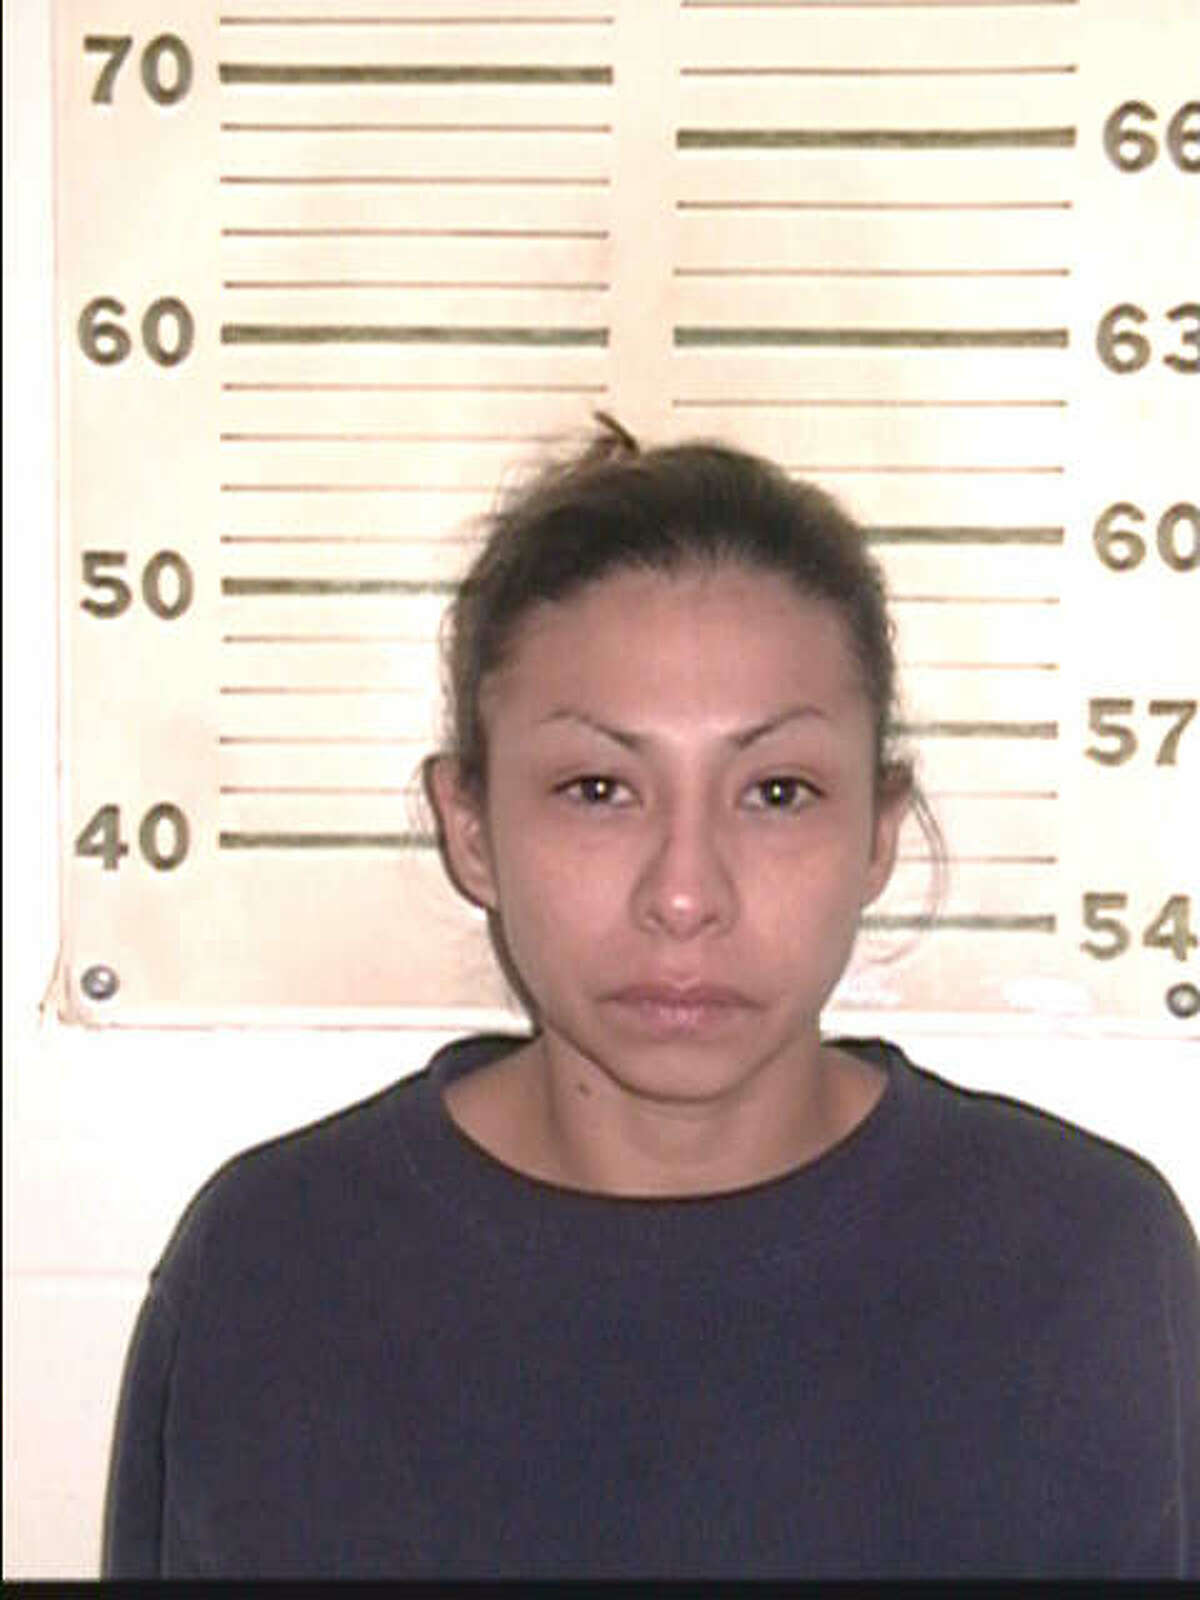 Angie Torres, 45, is facing a robbery charge unrelated to the King Jay Davila investigation. This mugshot was taken in 2004.